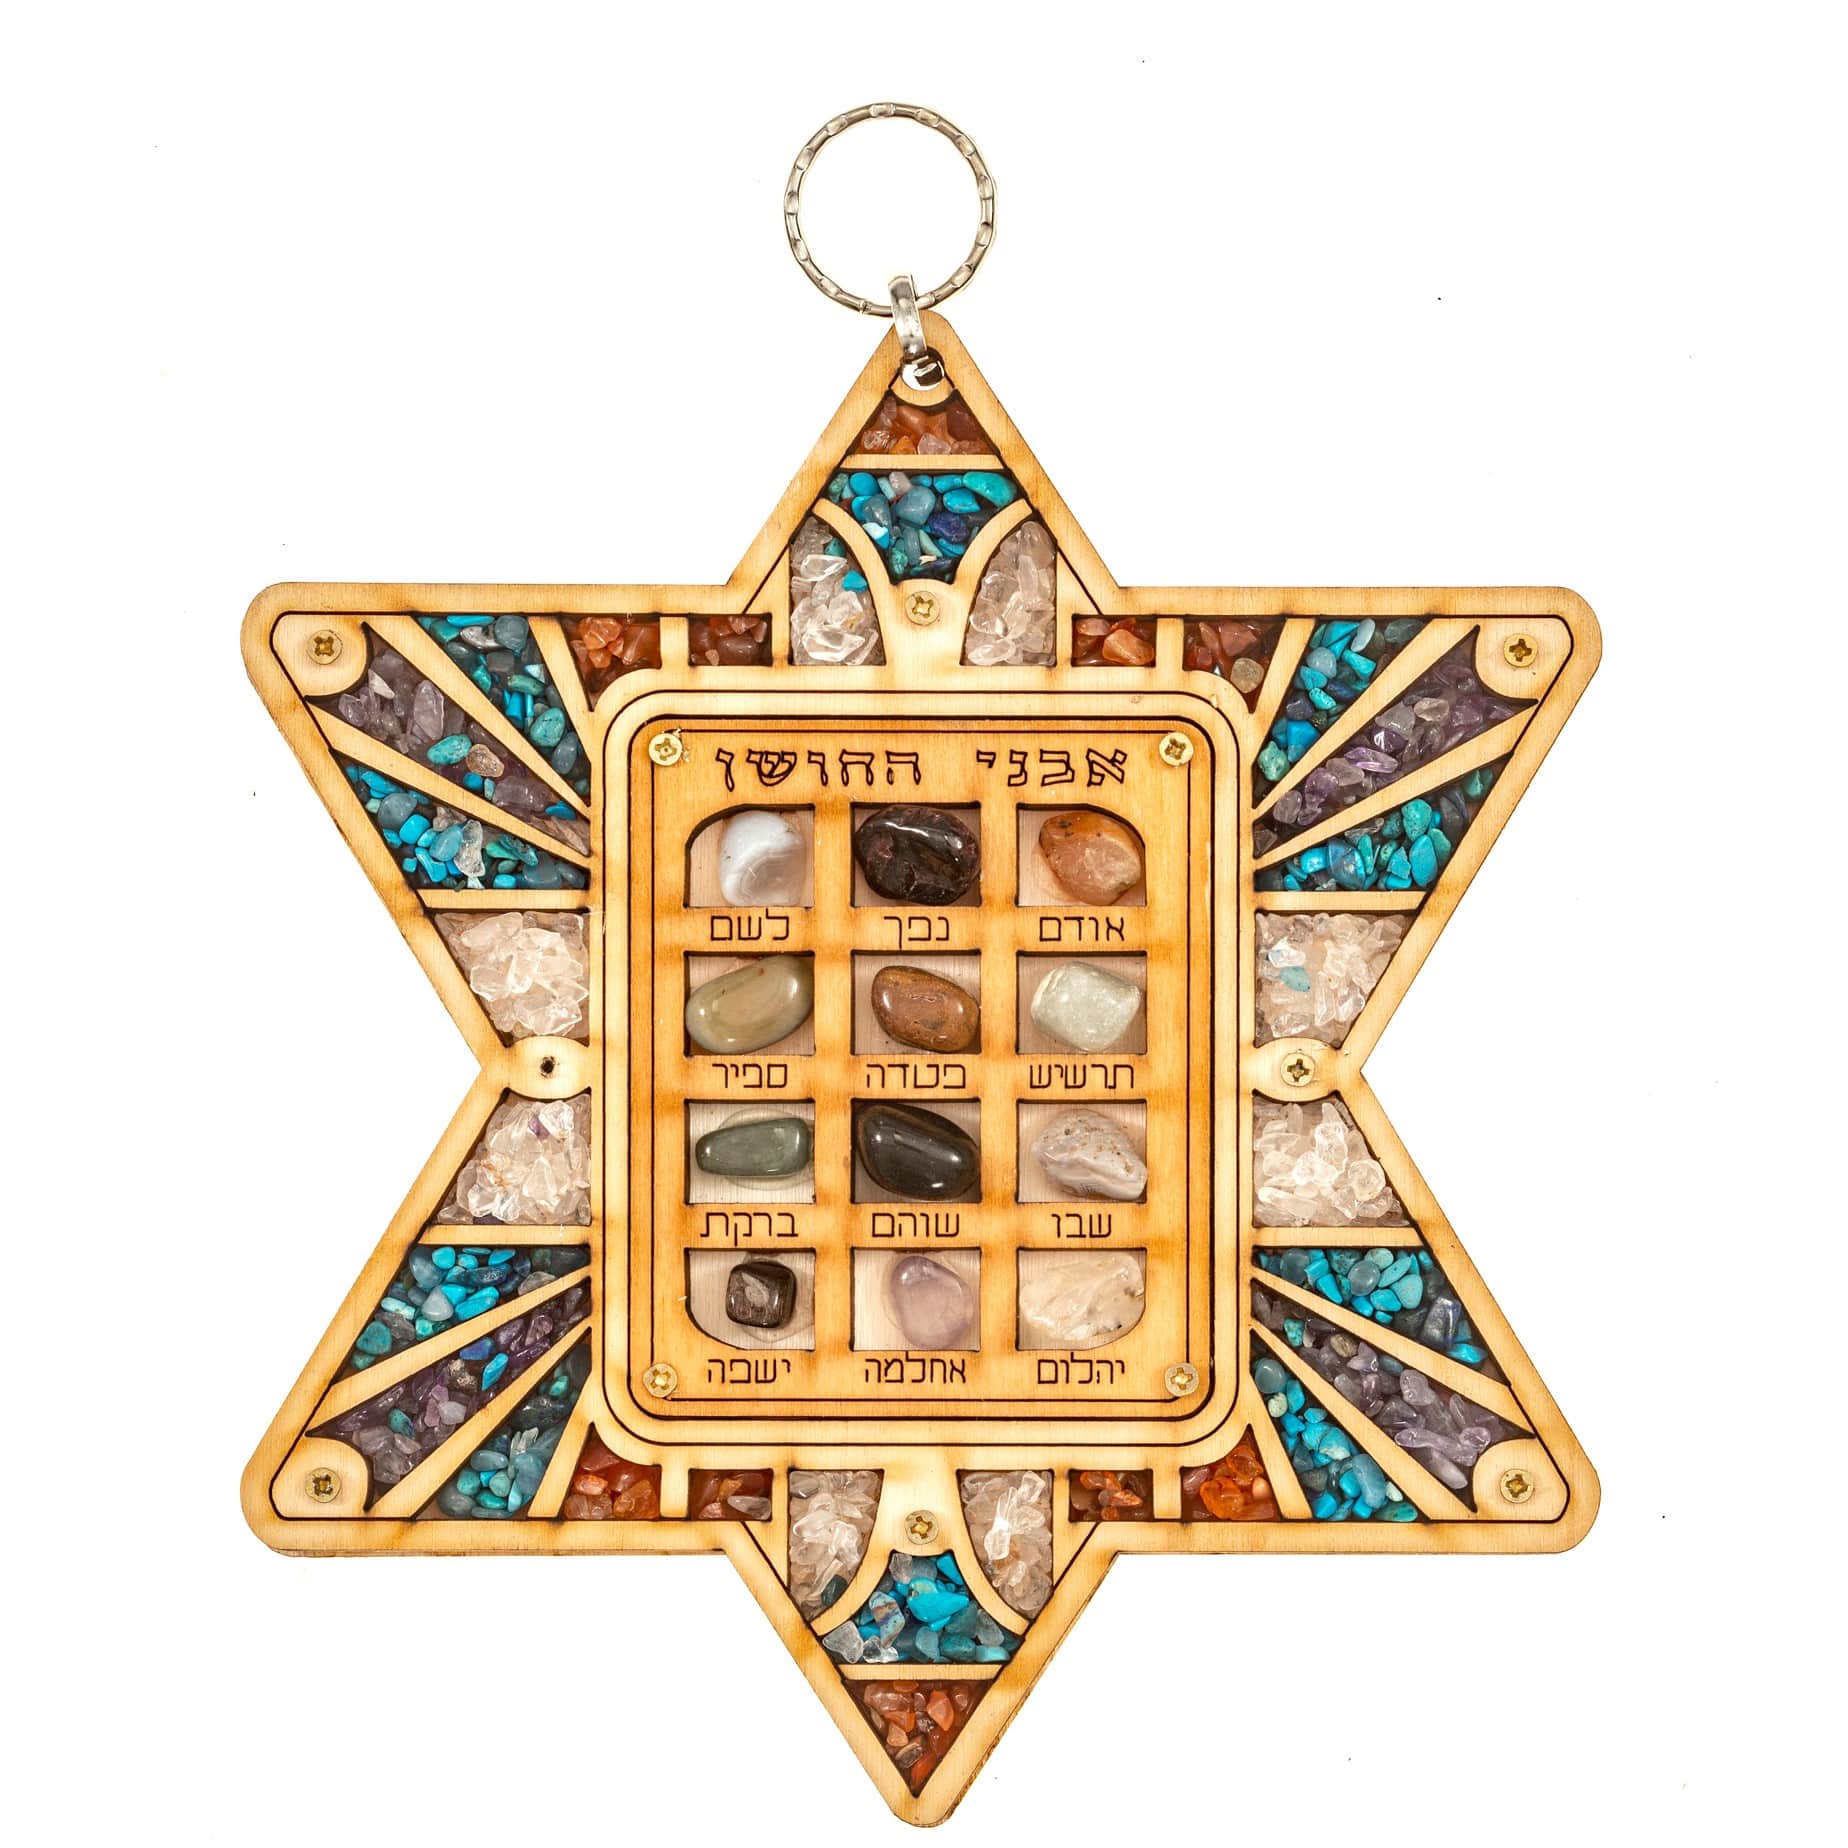 Stones of the breastplate Star of David